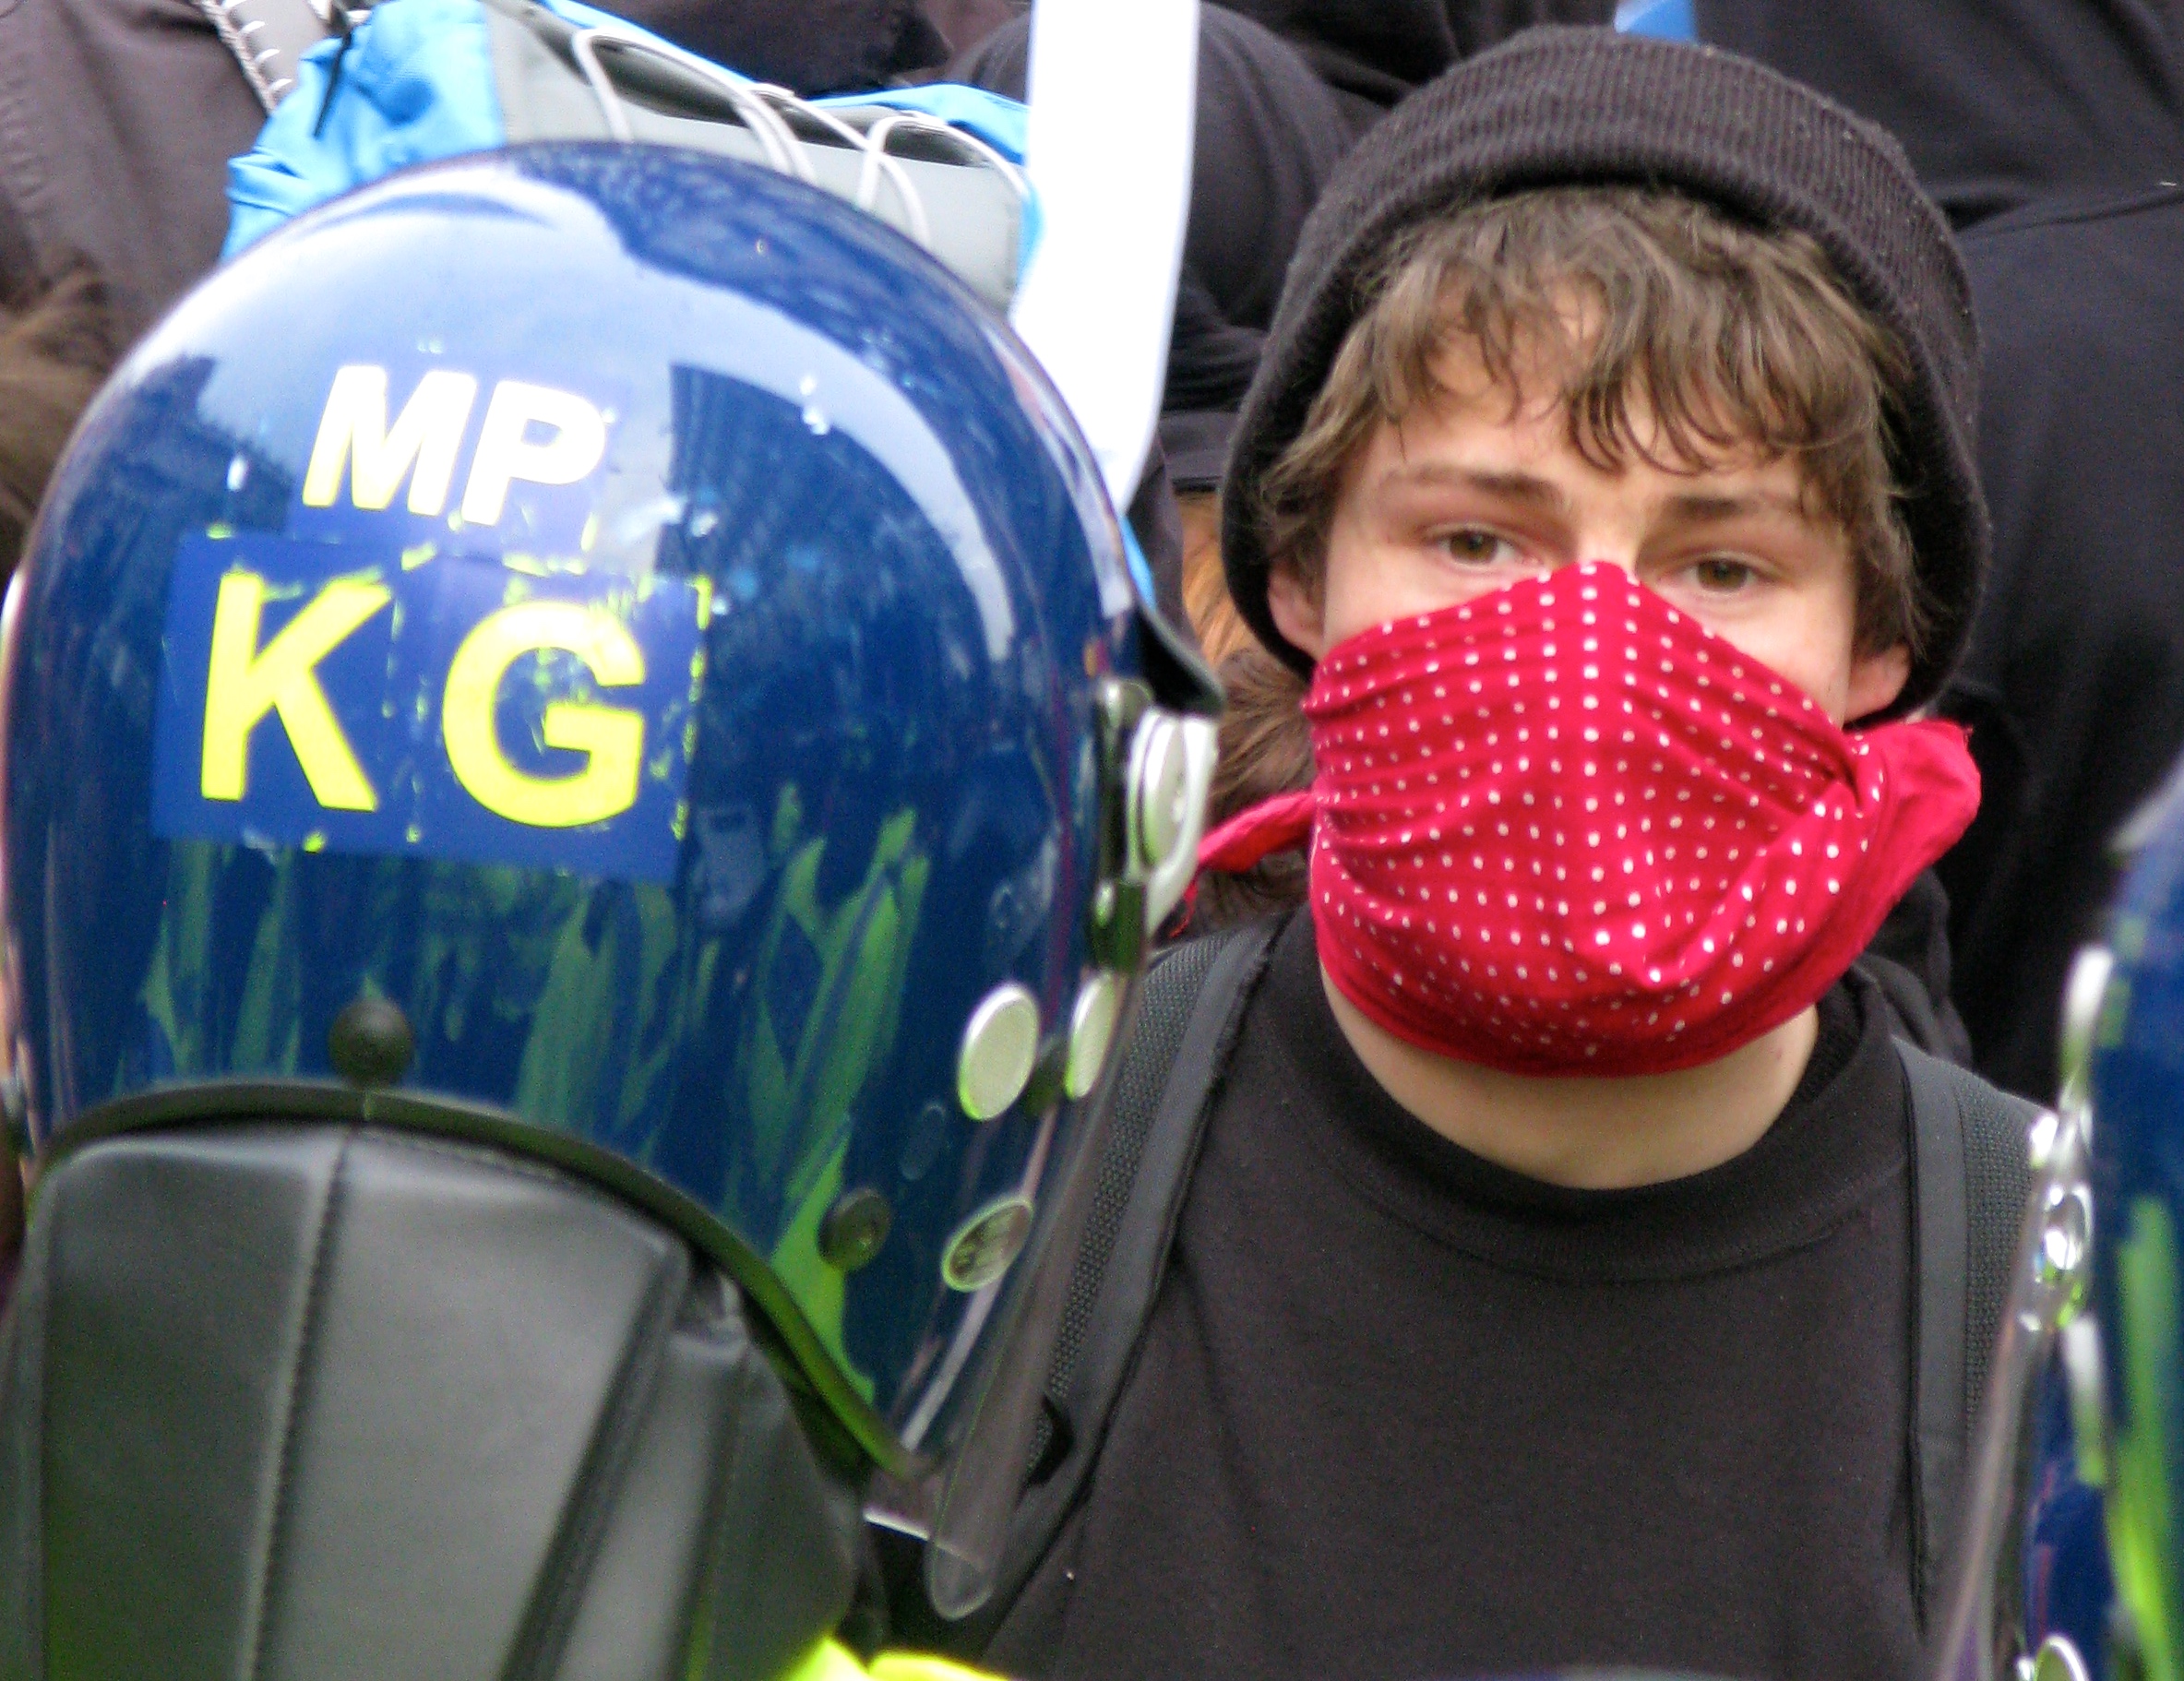 Protestor and Police Officer (© Paul Coleman, London Intelligence, 2011)